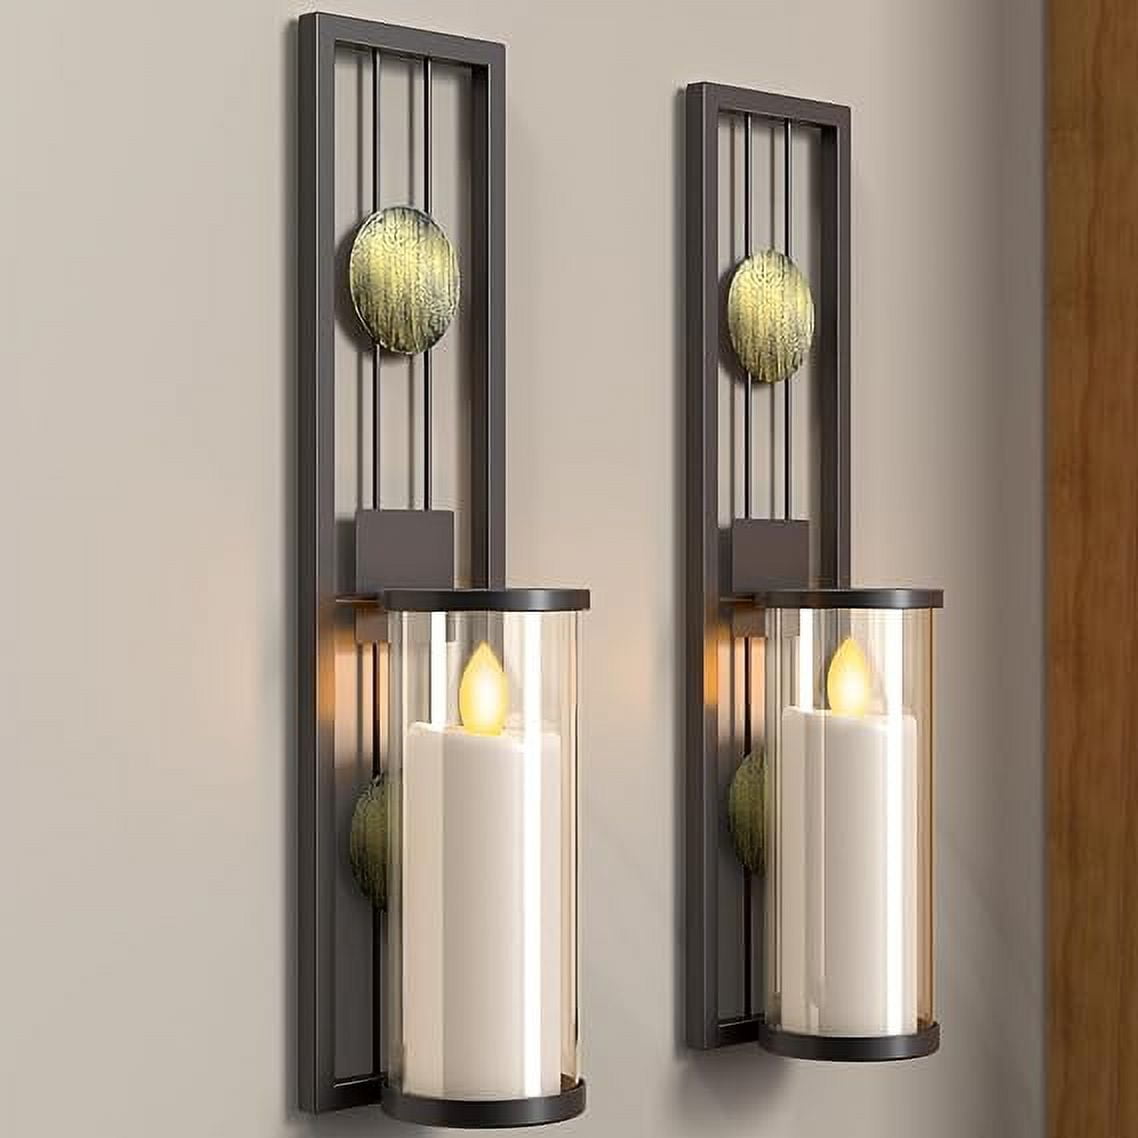 ALLADINBOX Wall Candle Holder, Sconces Classic Metal Acrylic